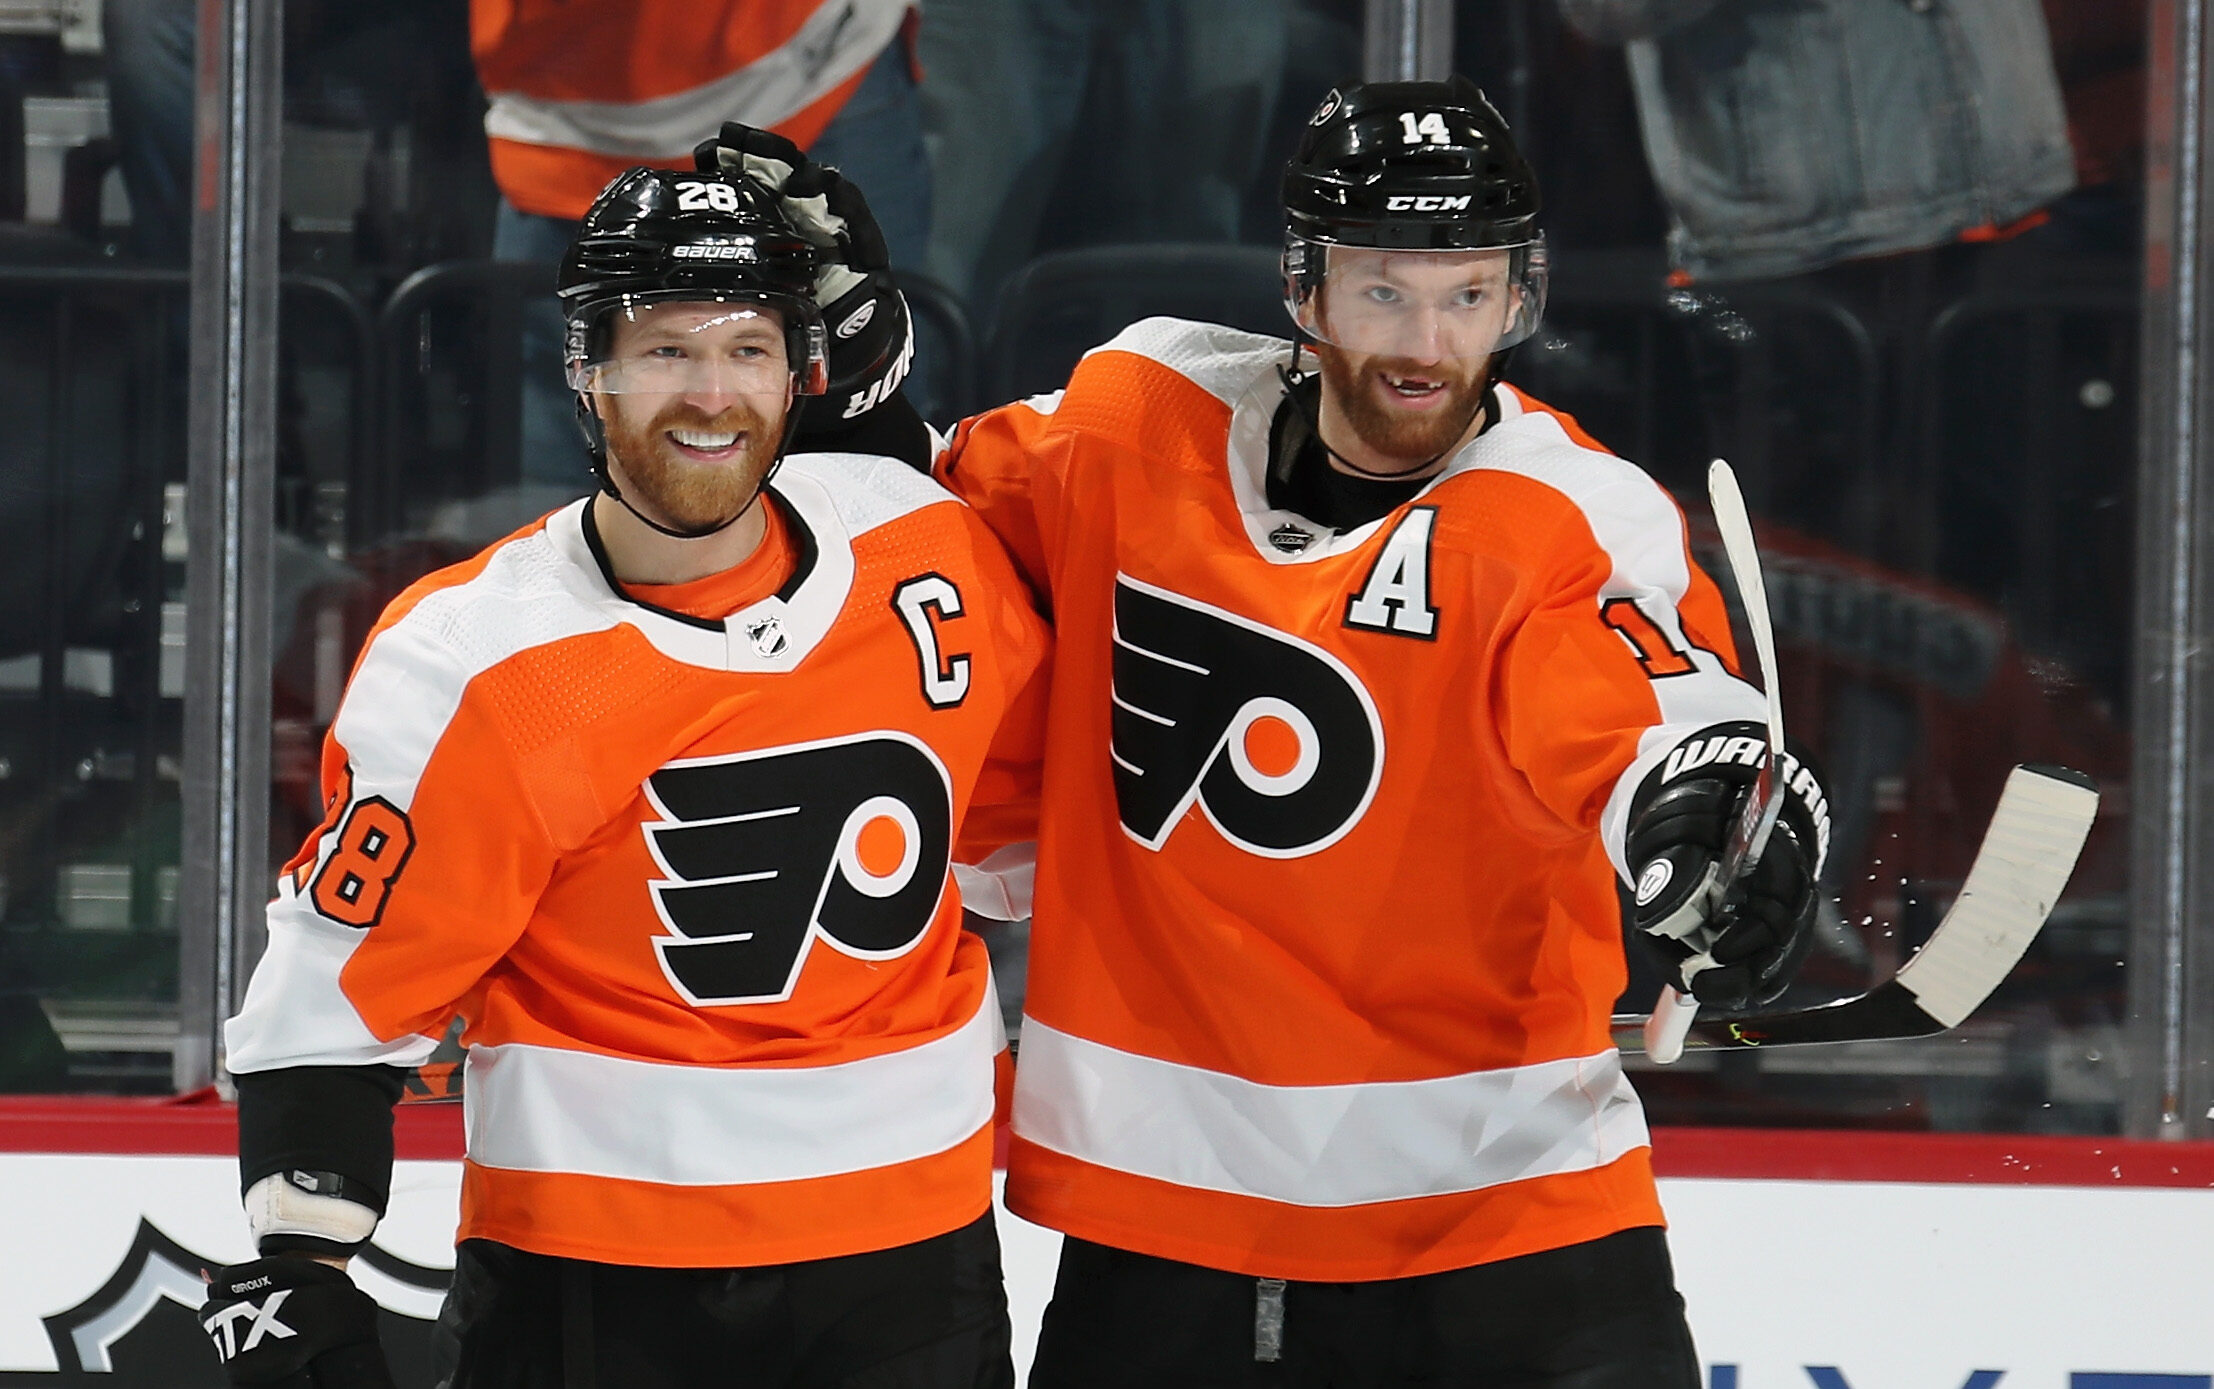 McCaffery: At 34, Flyers' Claude Giroux has earned right to finish